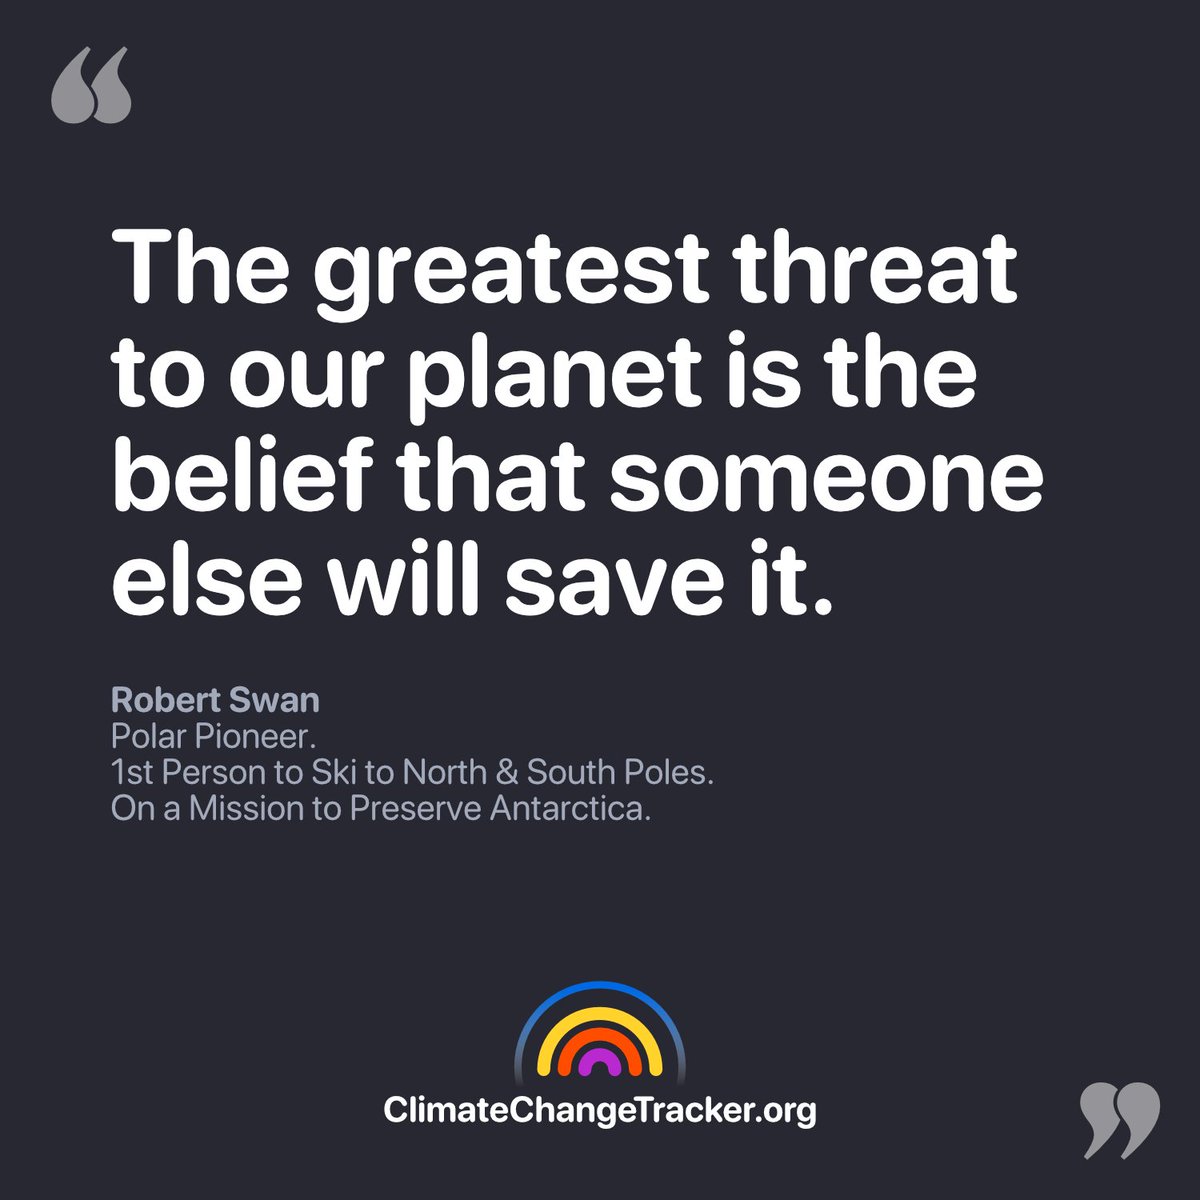 'The greatest threat to our planet is the belief that someone else will save it.' Robert Swan: Polar Pioneer. 1st Person to Ski to North & South Poles. On a Mission to Preserve Antarctica. climatechangetracker.org #ClimateAction #ClimateChange #ClimateTech…